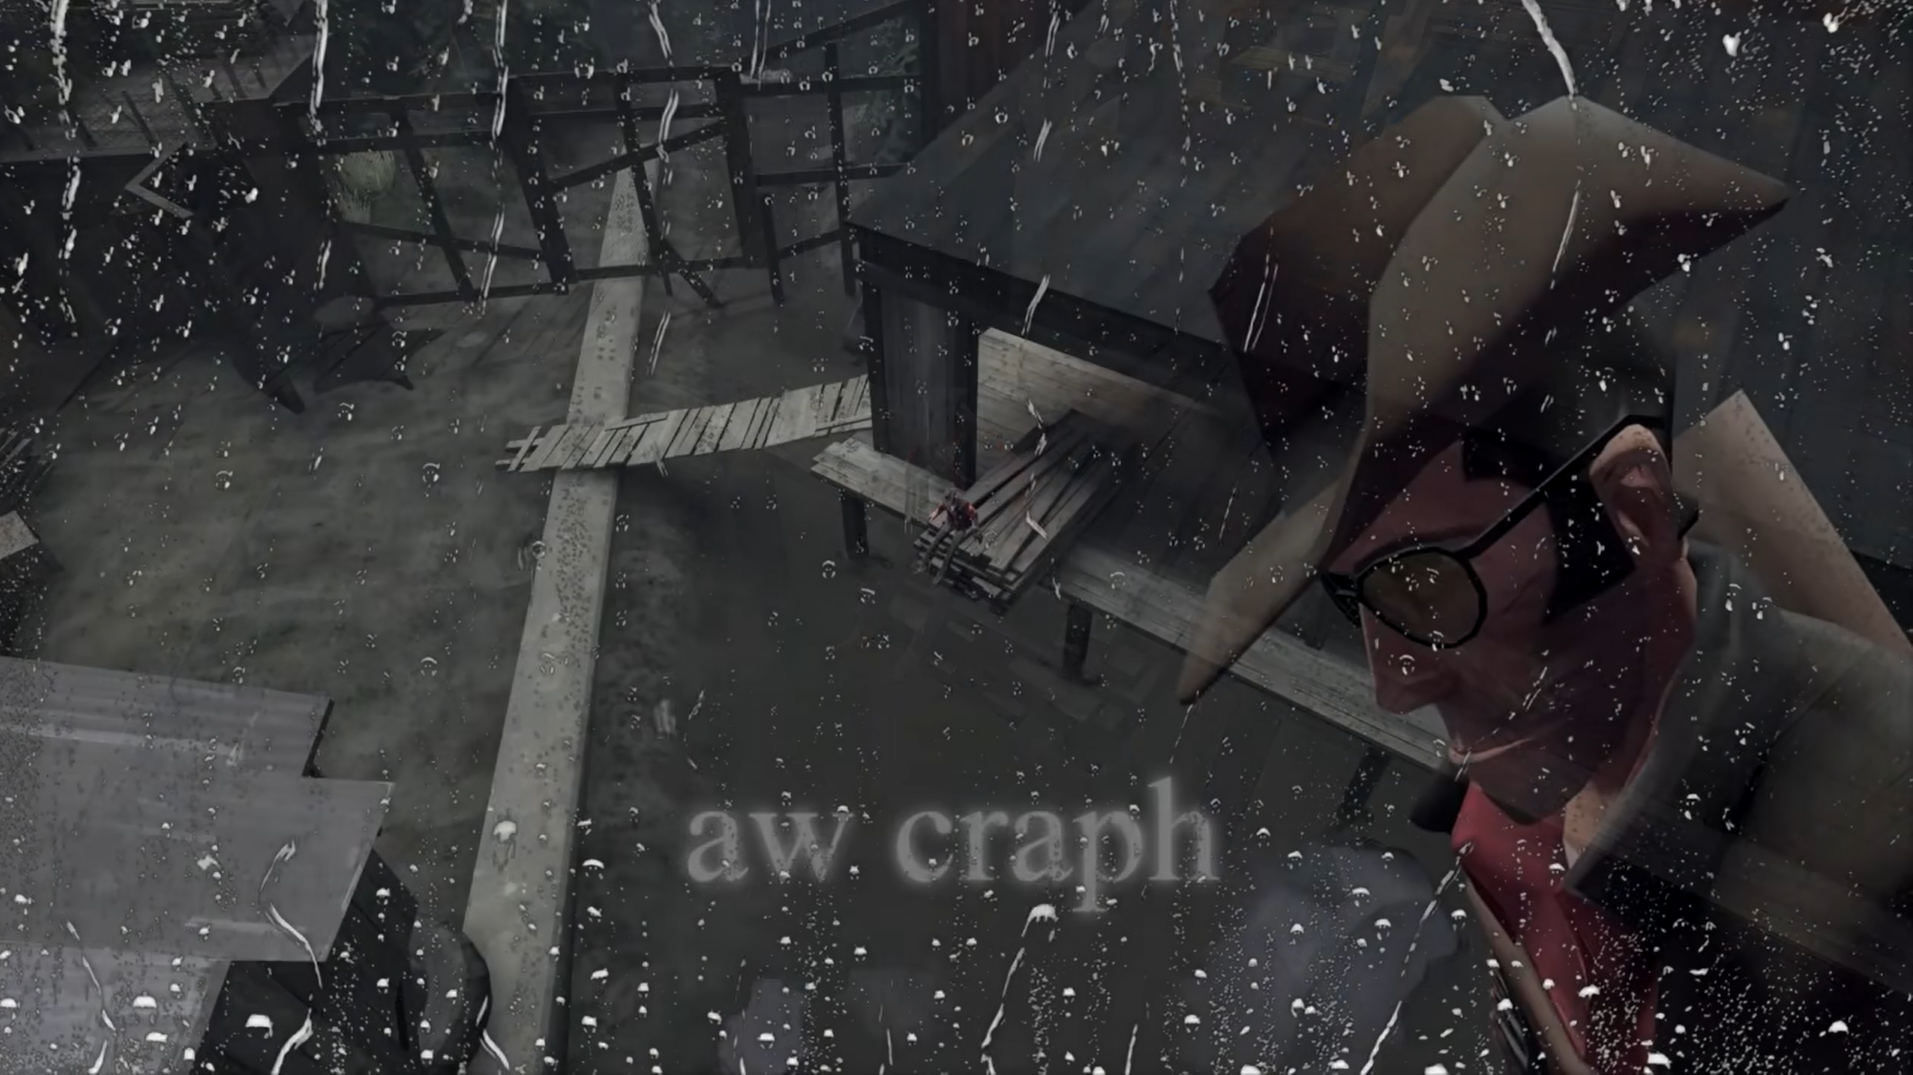 High Quality aw craph Blank Meme Template